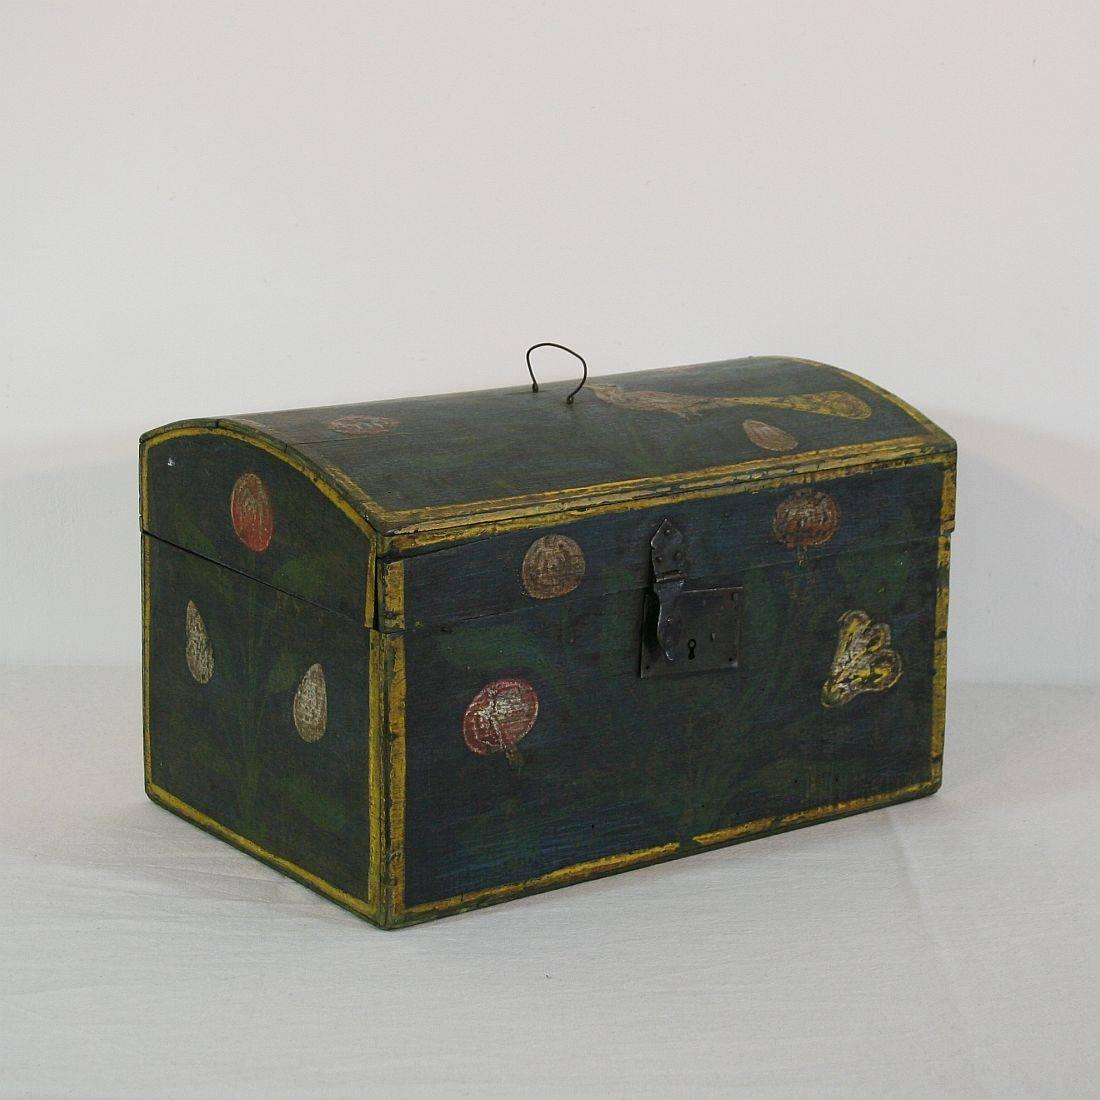 Beautiful painted wooden weddingbox with its original painted decor of a bird, flowers and wrought iron lock (no key). Weathered and small repairs.